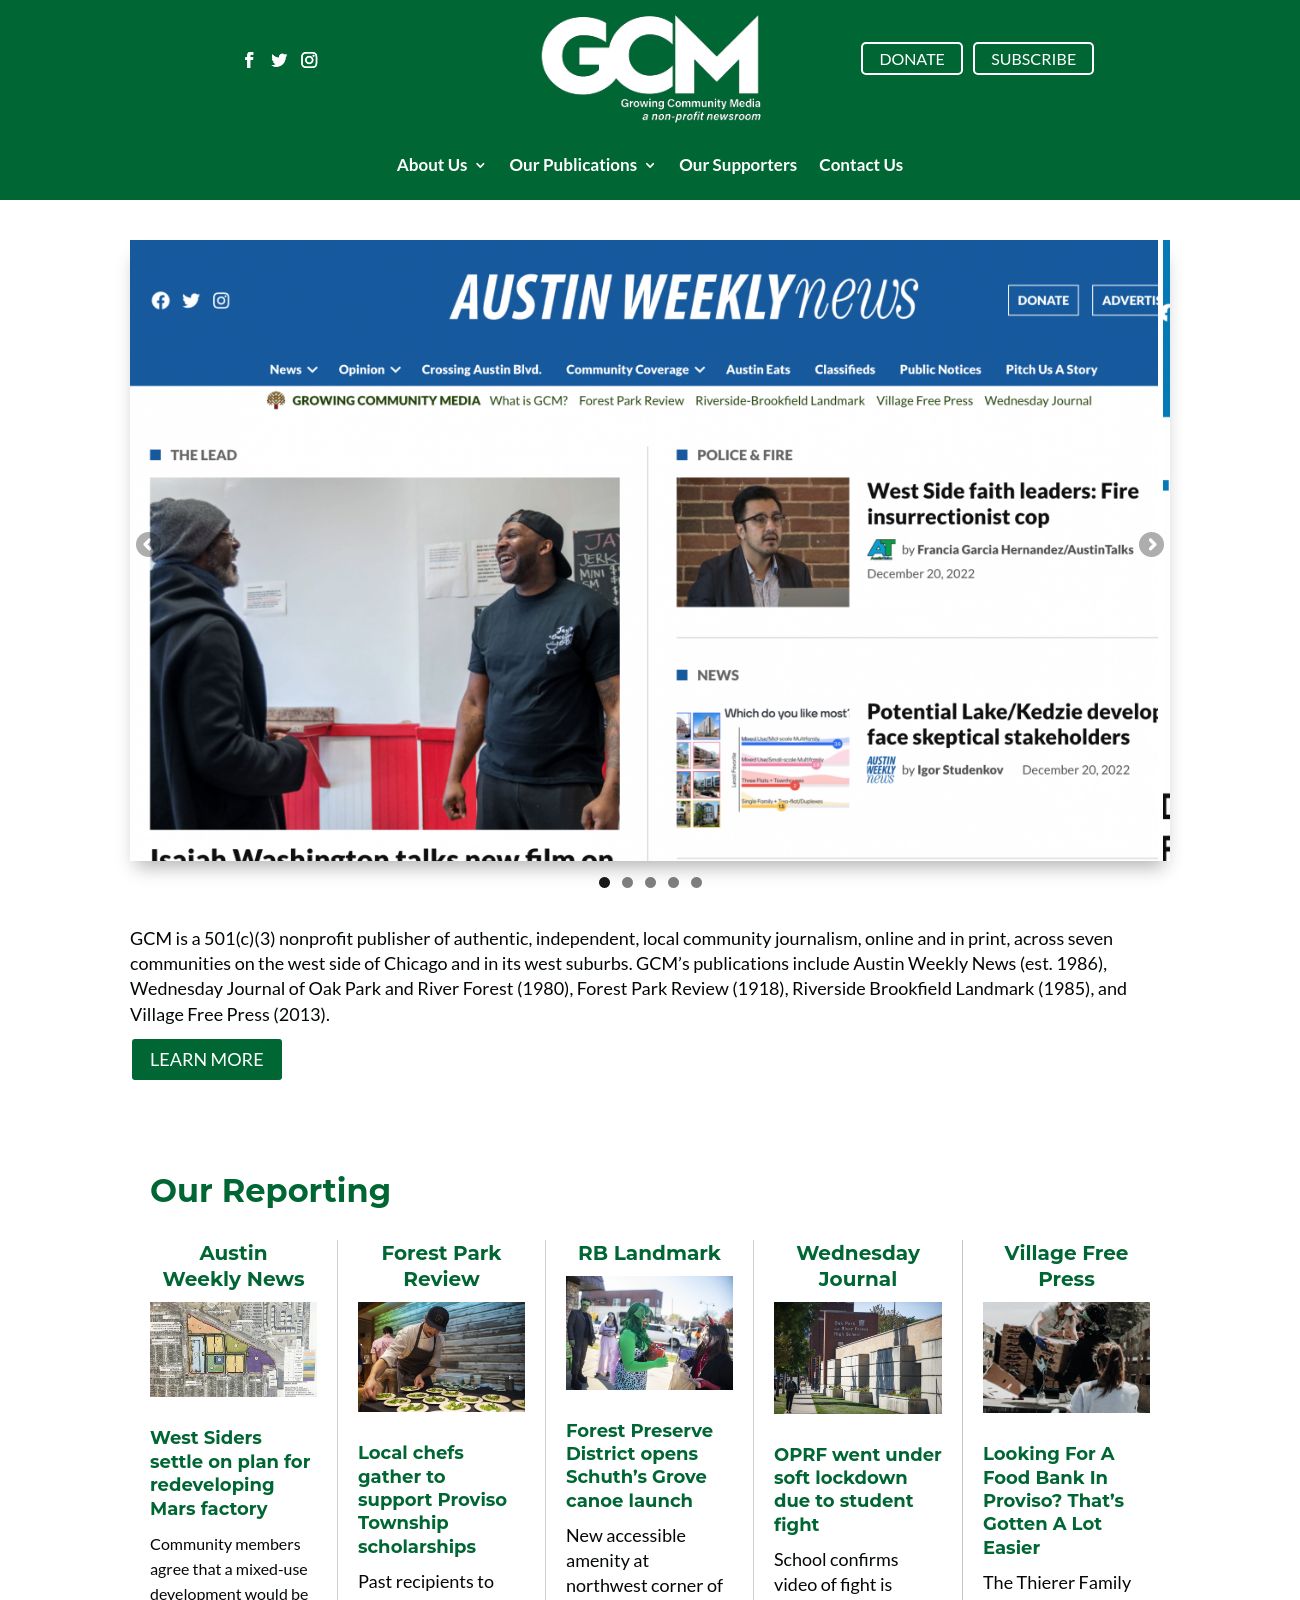 Austin Weekly News at 2023-01-25 17:01:13-06:00 local time